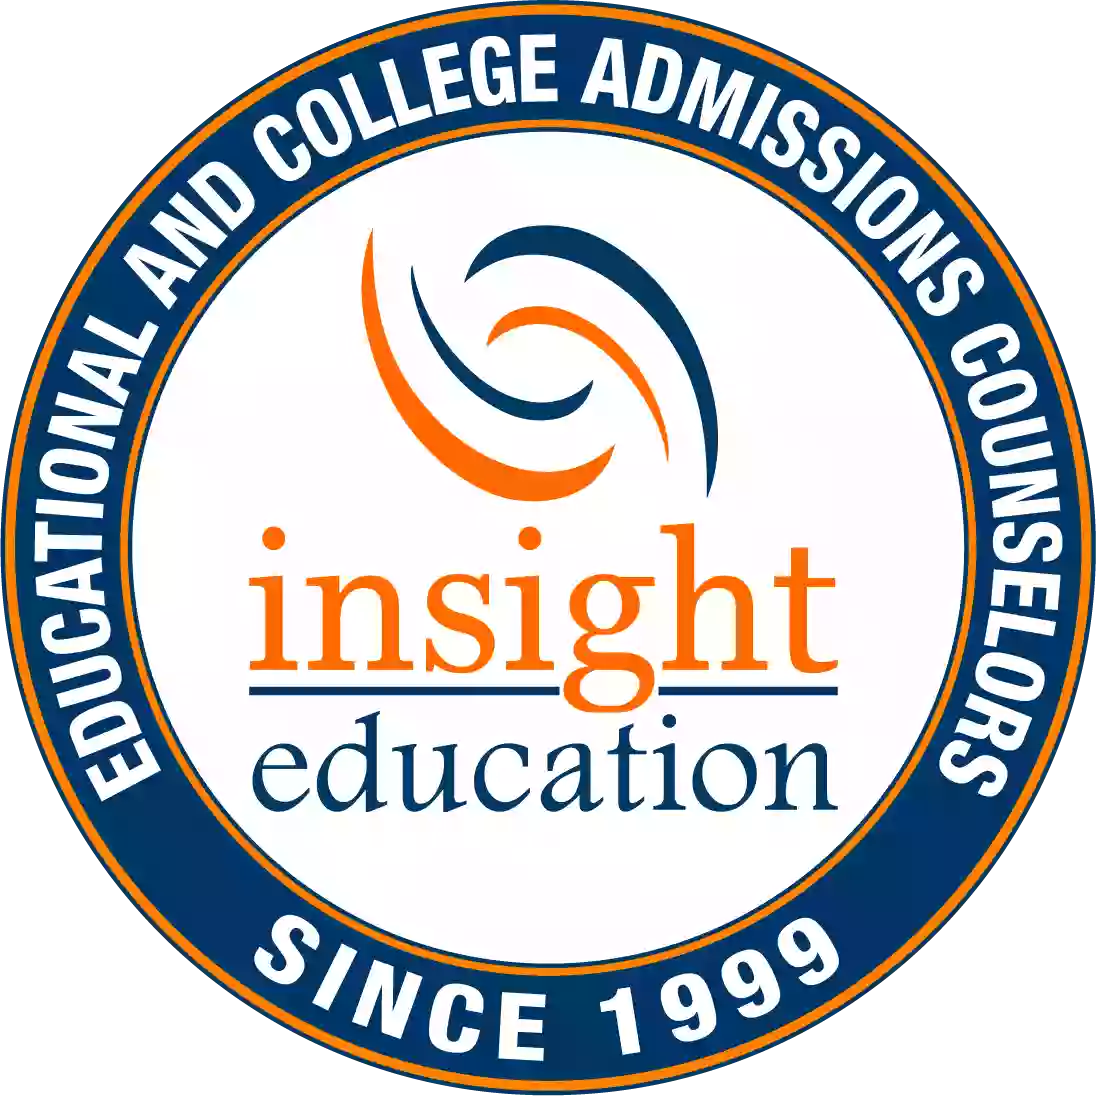 Insight Education: College Admissions Counselors, Test Prep, & Tutoring